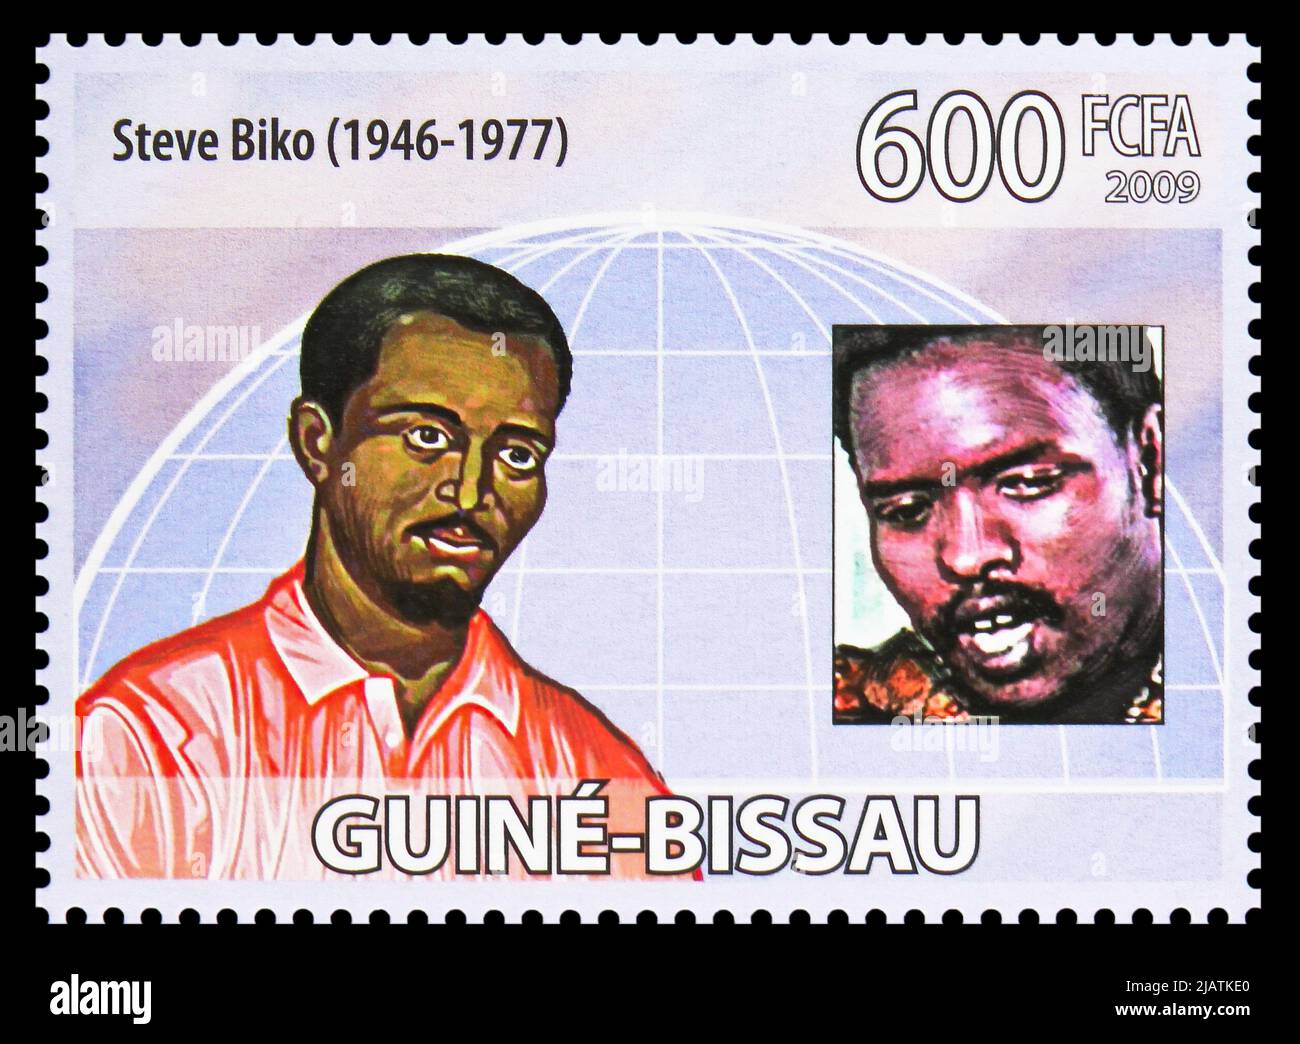 MOSCOW, RUSSIA - MAY 20, 2022: Postage stamp printed in Guinea-Bissau shows Steve Biko (1946-1977), South African anti-apartheid activist, serie, circ Stock Photo